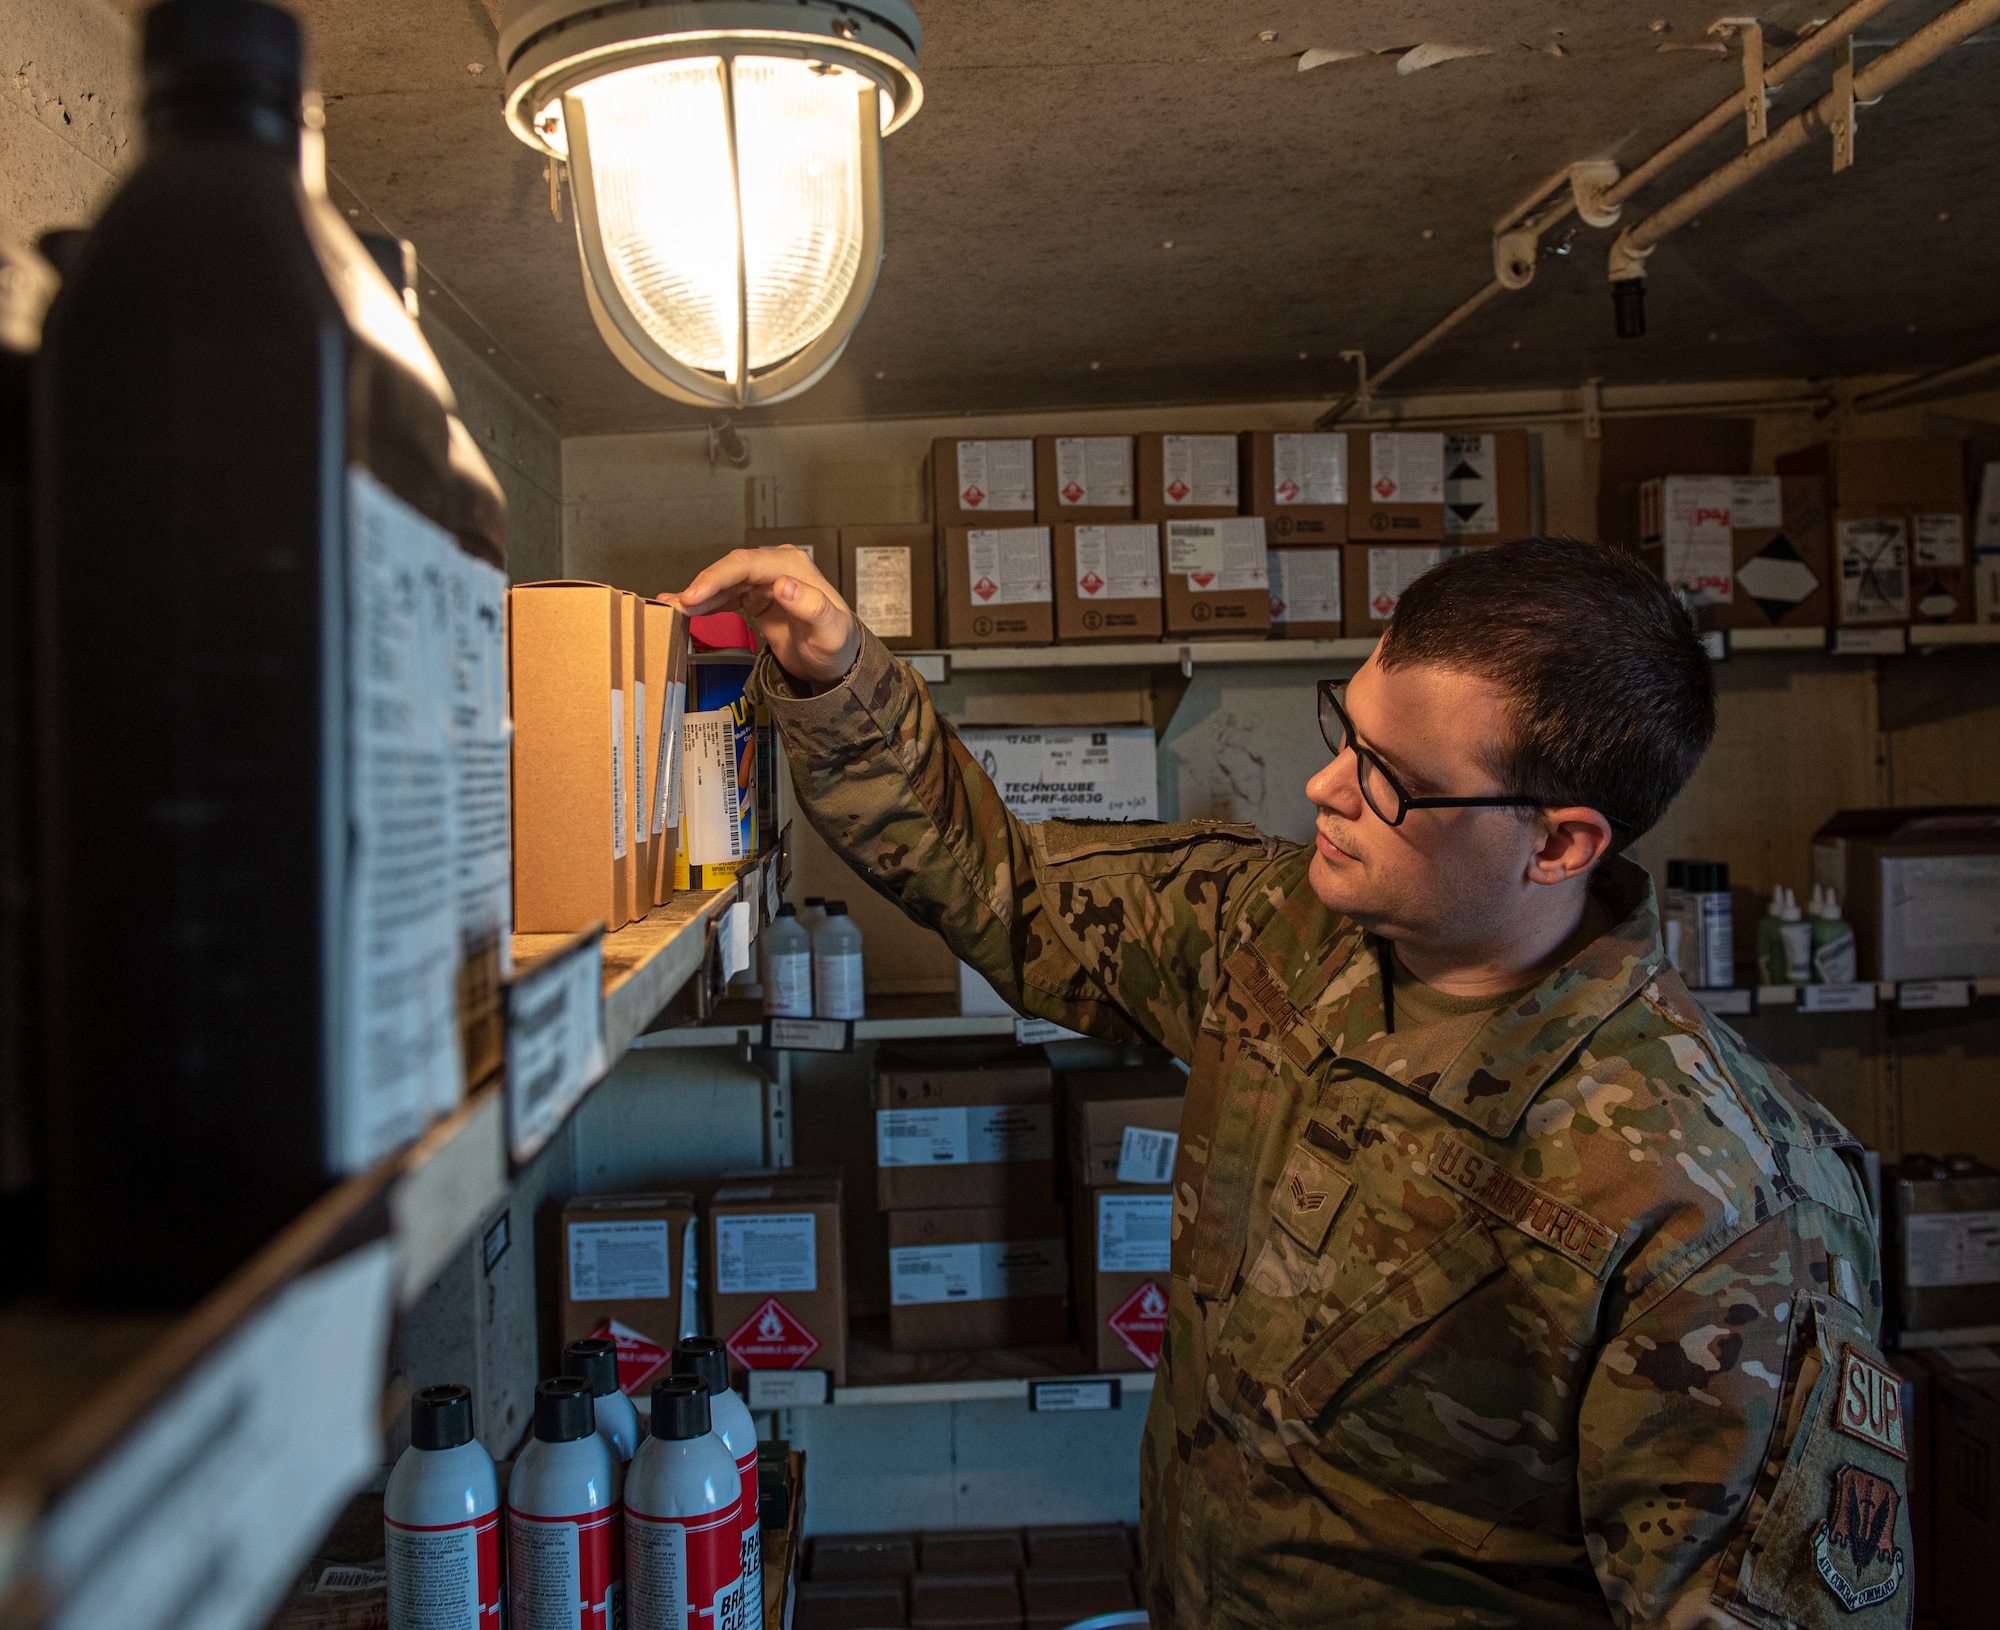 Senior Airman Dylan Buchheit, 4th Logistics Readiness Squadron material management journeyman, puts materials into storage at Seymour Johnson Air Force Base, North Carolina, May 17, 2022. The hazardous material shop has temperature-set storage units to keep substances from becoming less effective or from expiring. (U.S. Air Force photo by Airman 1st Class Sabrina Fuller)